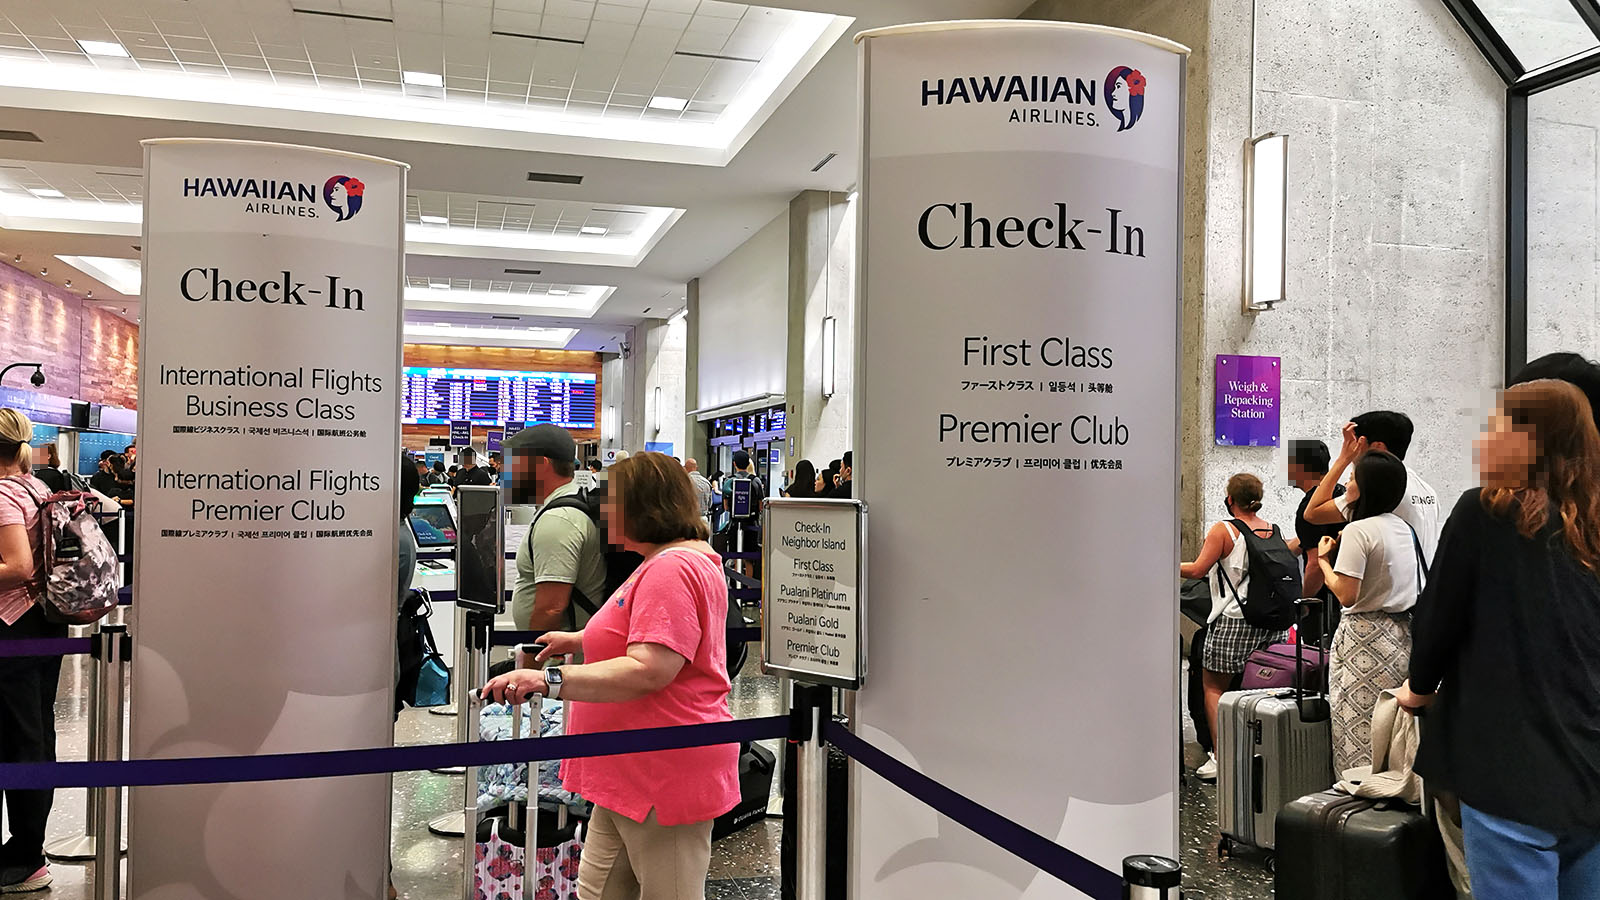 Check-in queue for First Class with Hawaiian Airlines